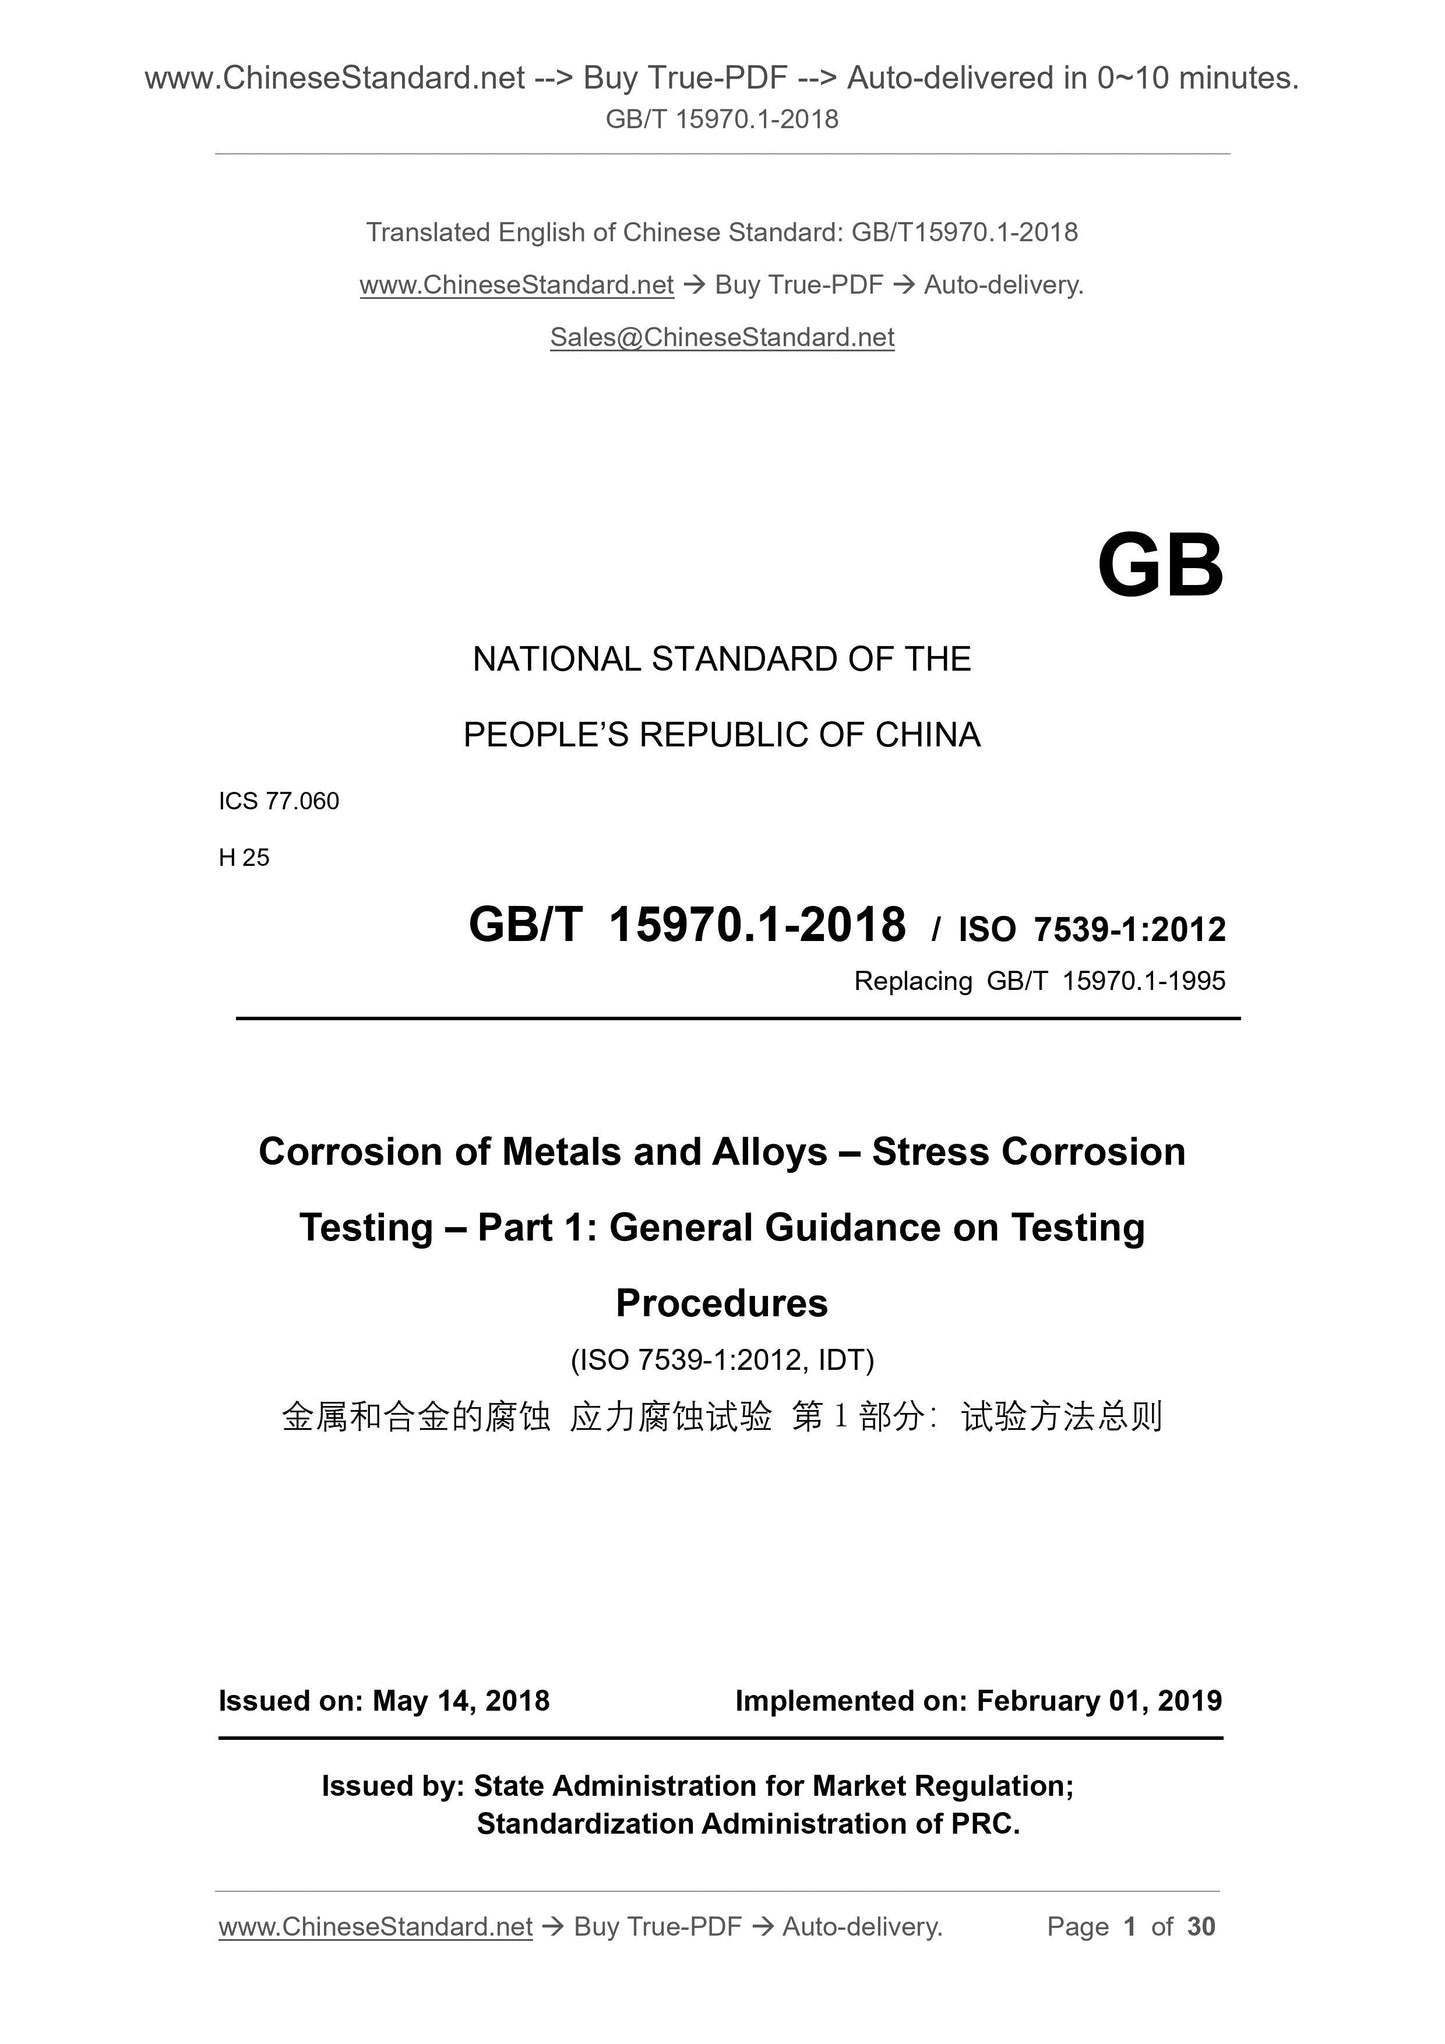 GB/T 15970.1-2018 Page 1